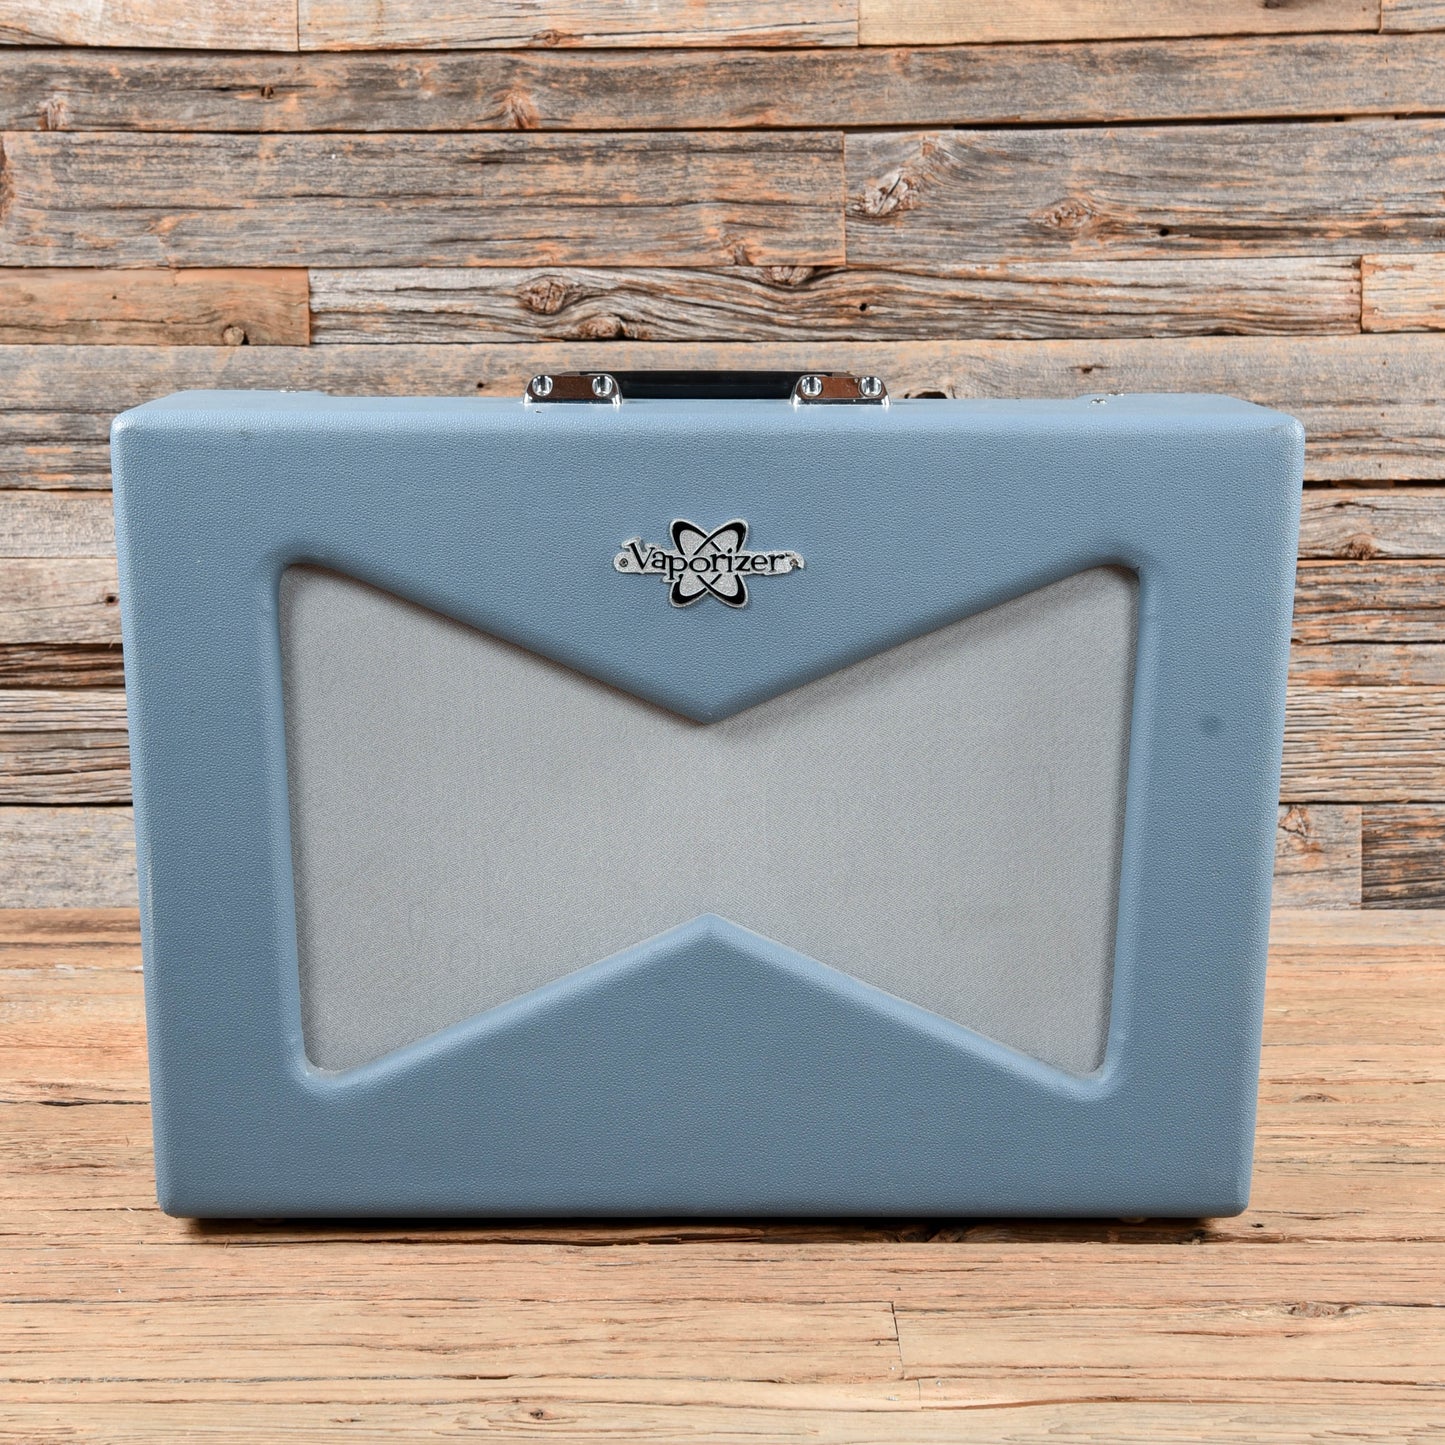 Fender Vaporizer 12w 2x10 Combo w/Footswitch Slate Blue 2013 Amps / Guitar Combos